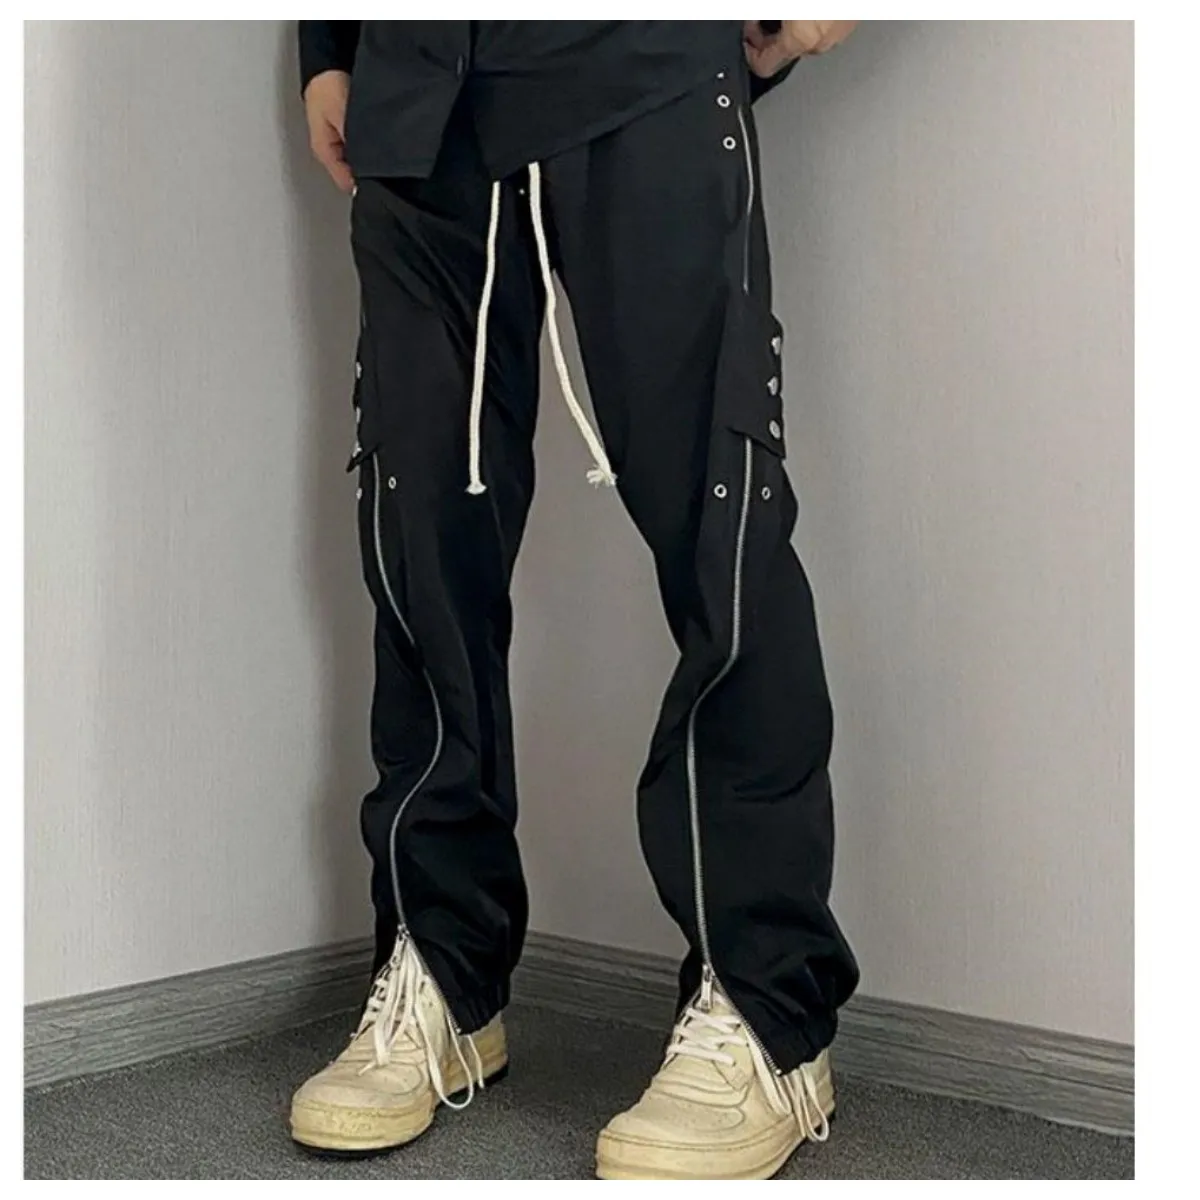 American Black Zipper Work Suit With Side Buckle Zipper  Pants Casual And Loose Fitting Straight Tube Fashion Style